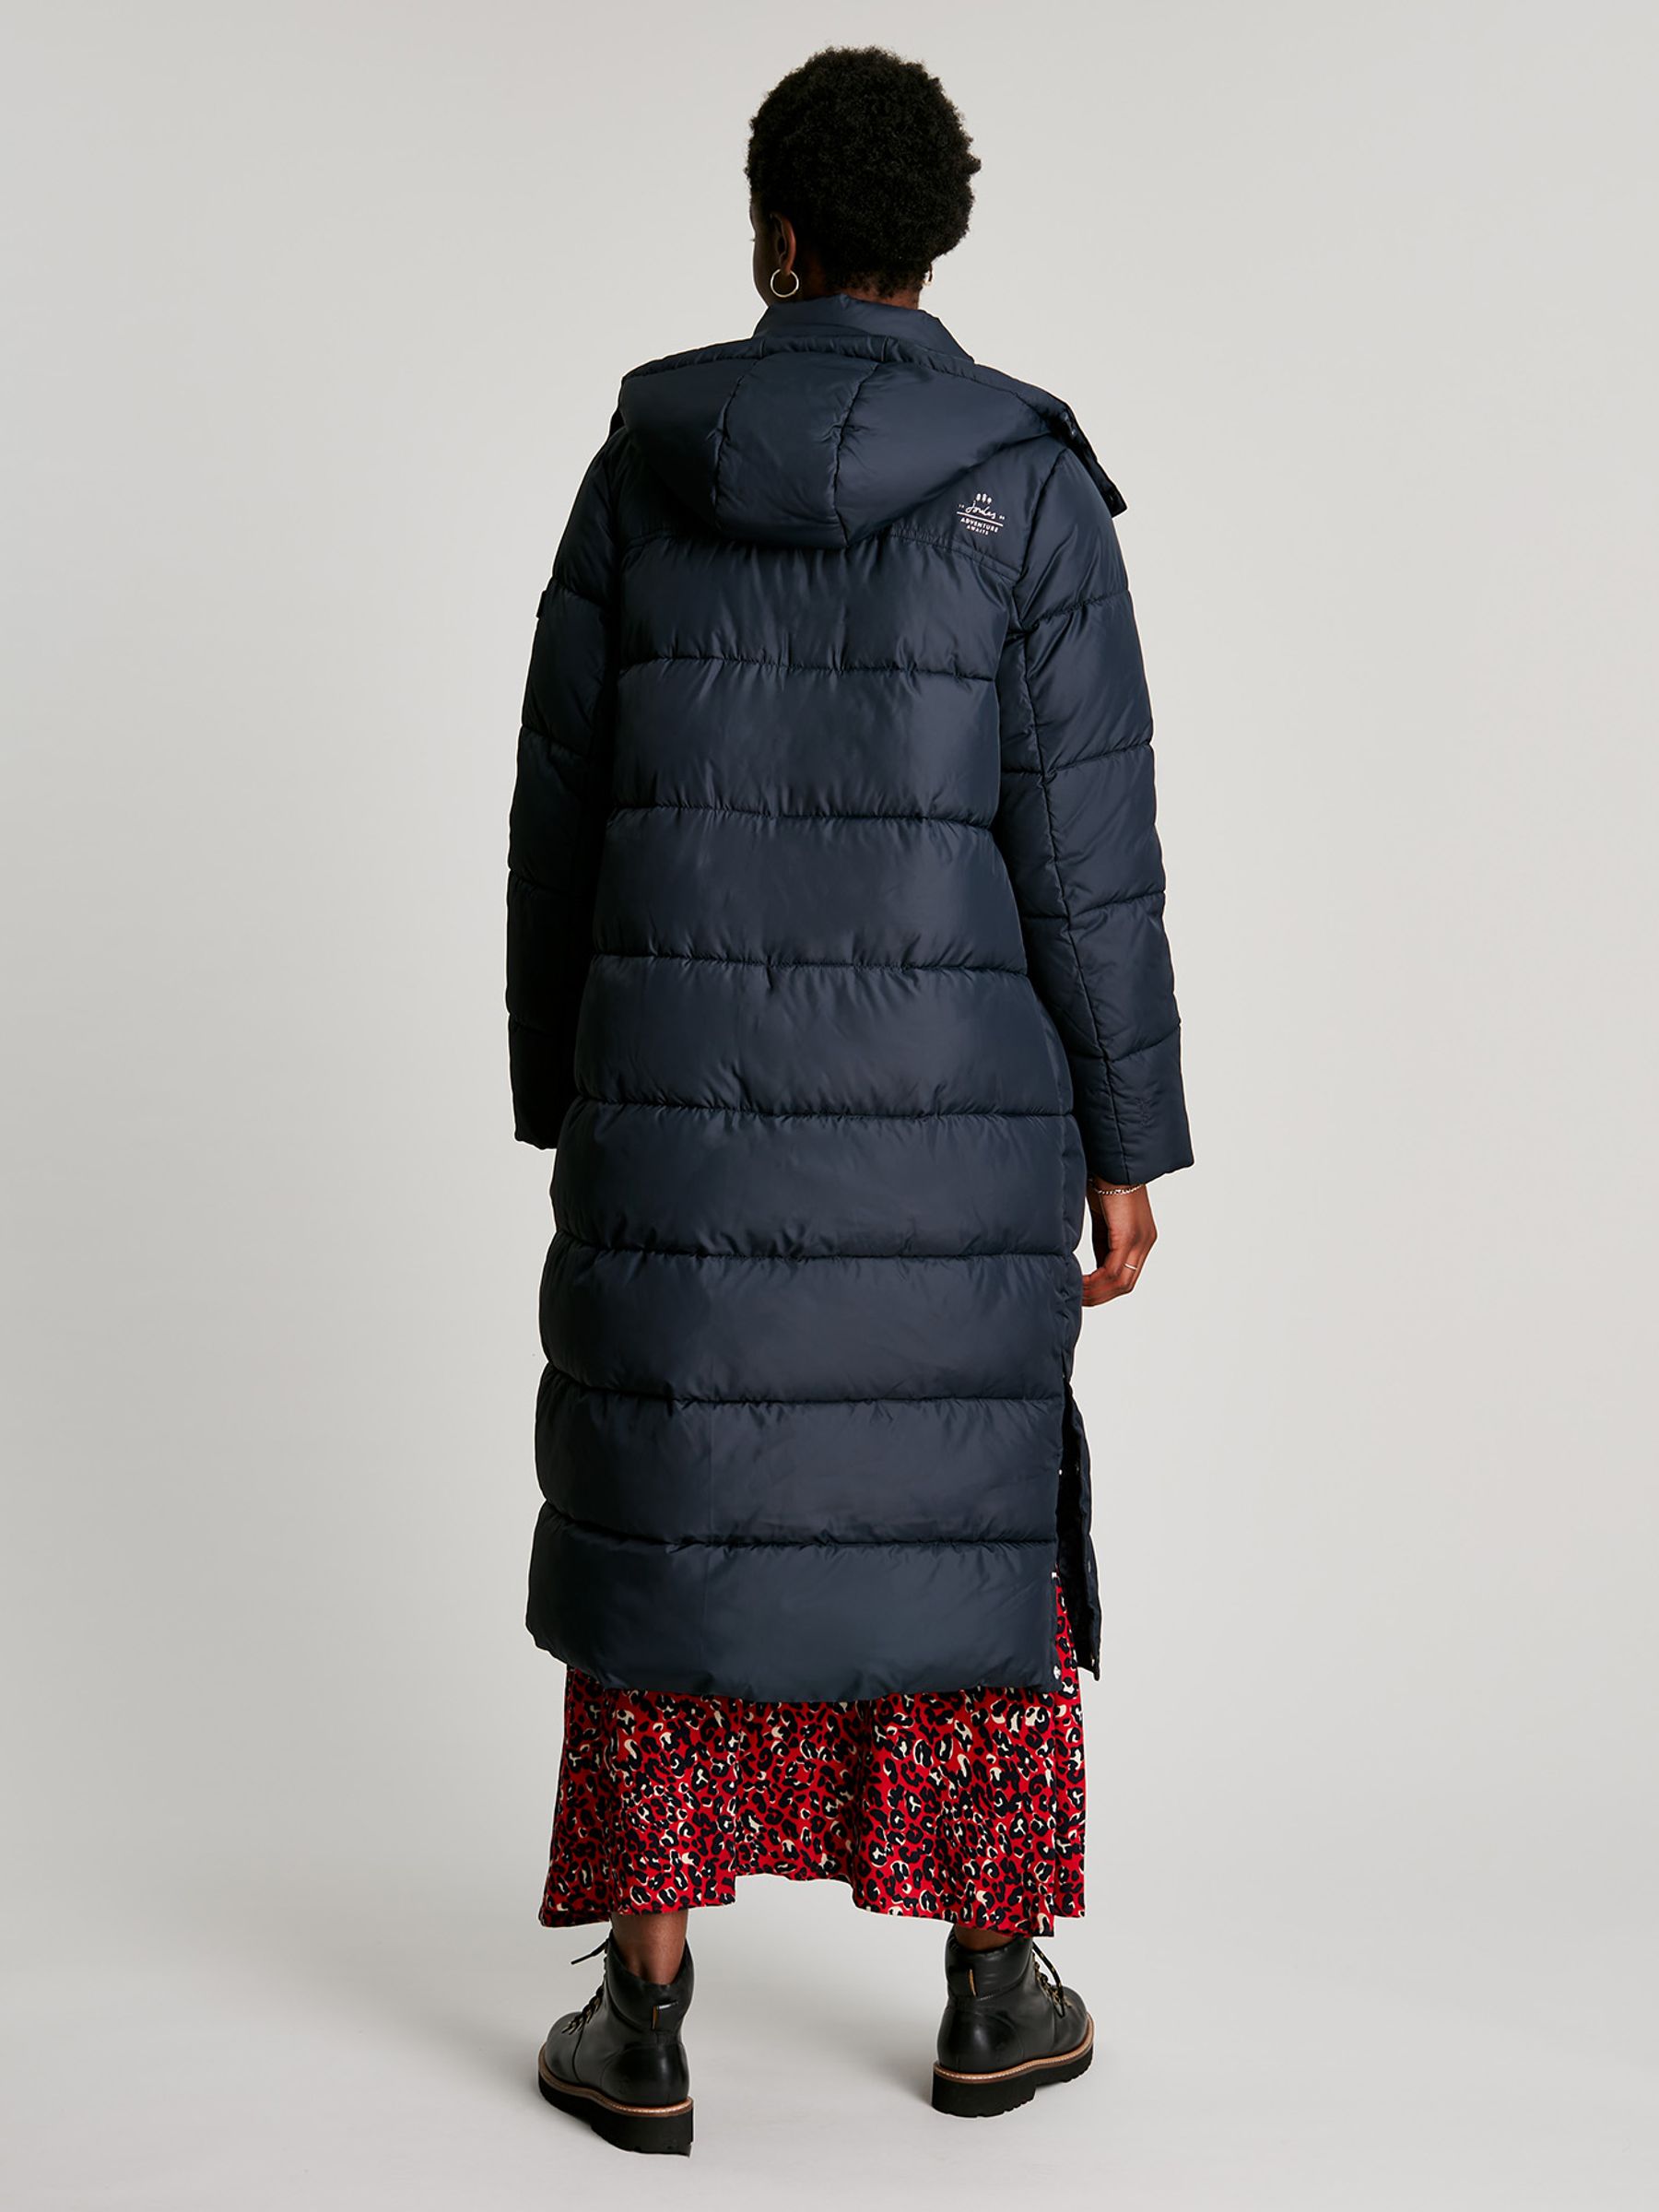 Buy Joules Blue Elberry Long Jacket from the Joules online shop